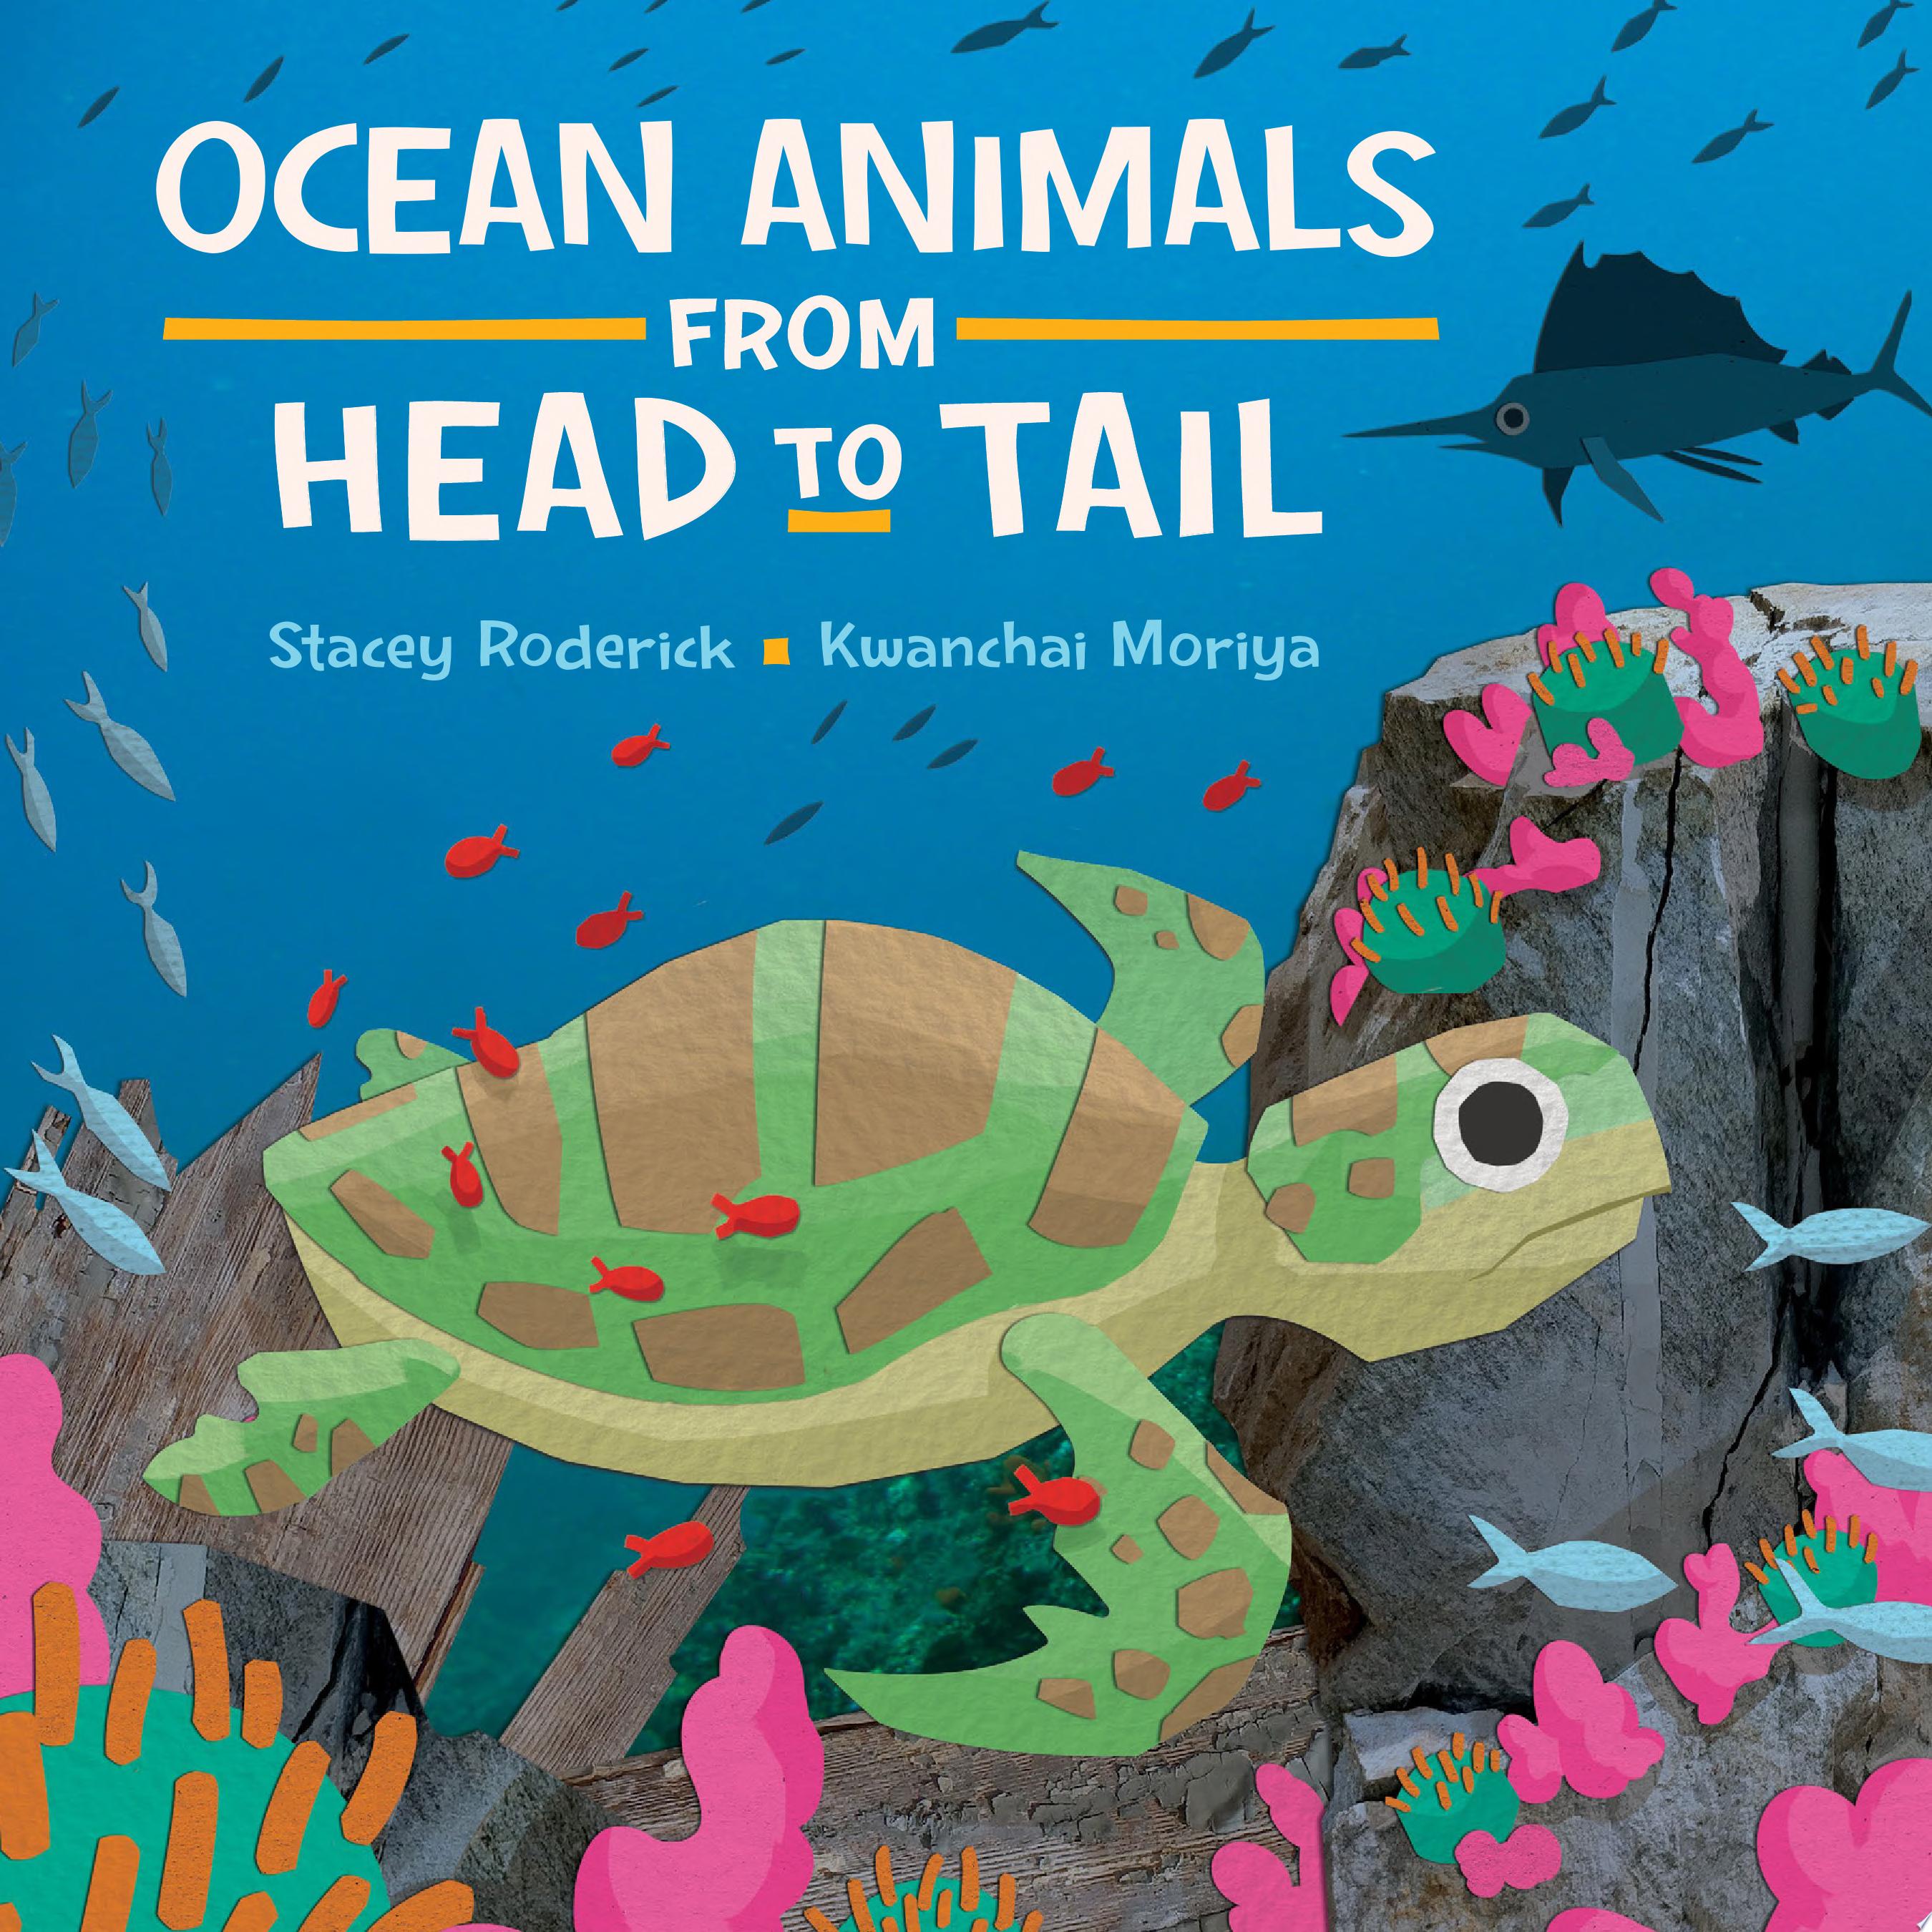 Image for "Ocean Animals from Head to Tail"